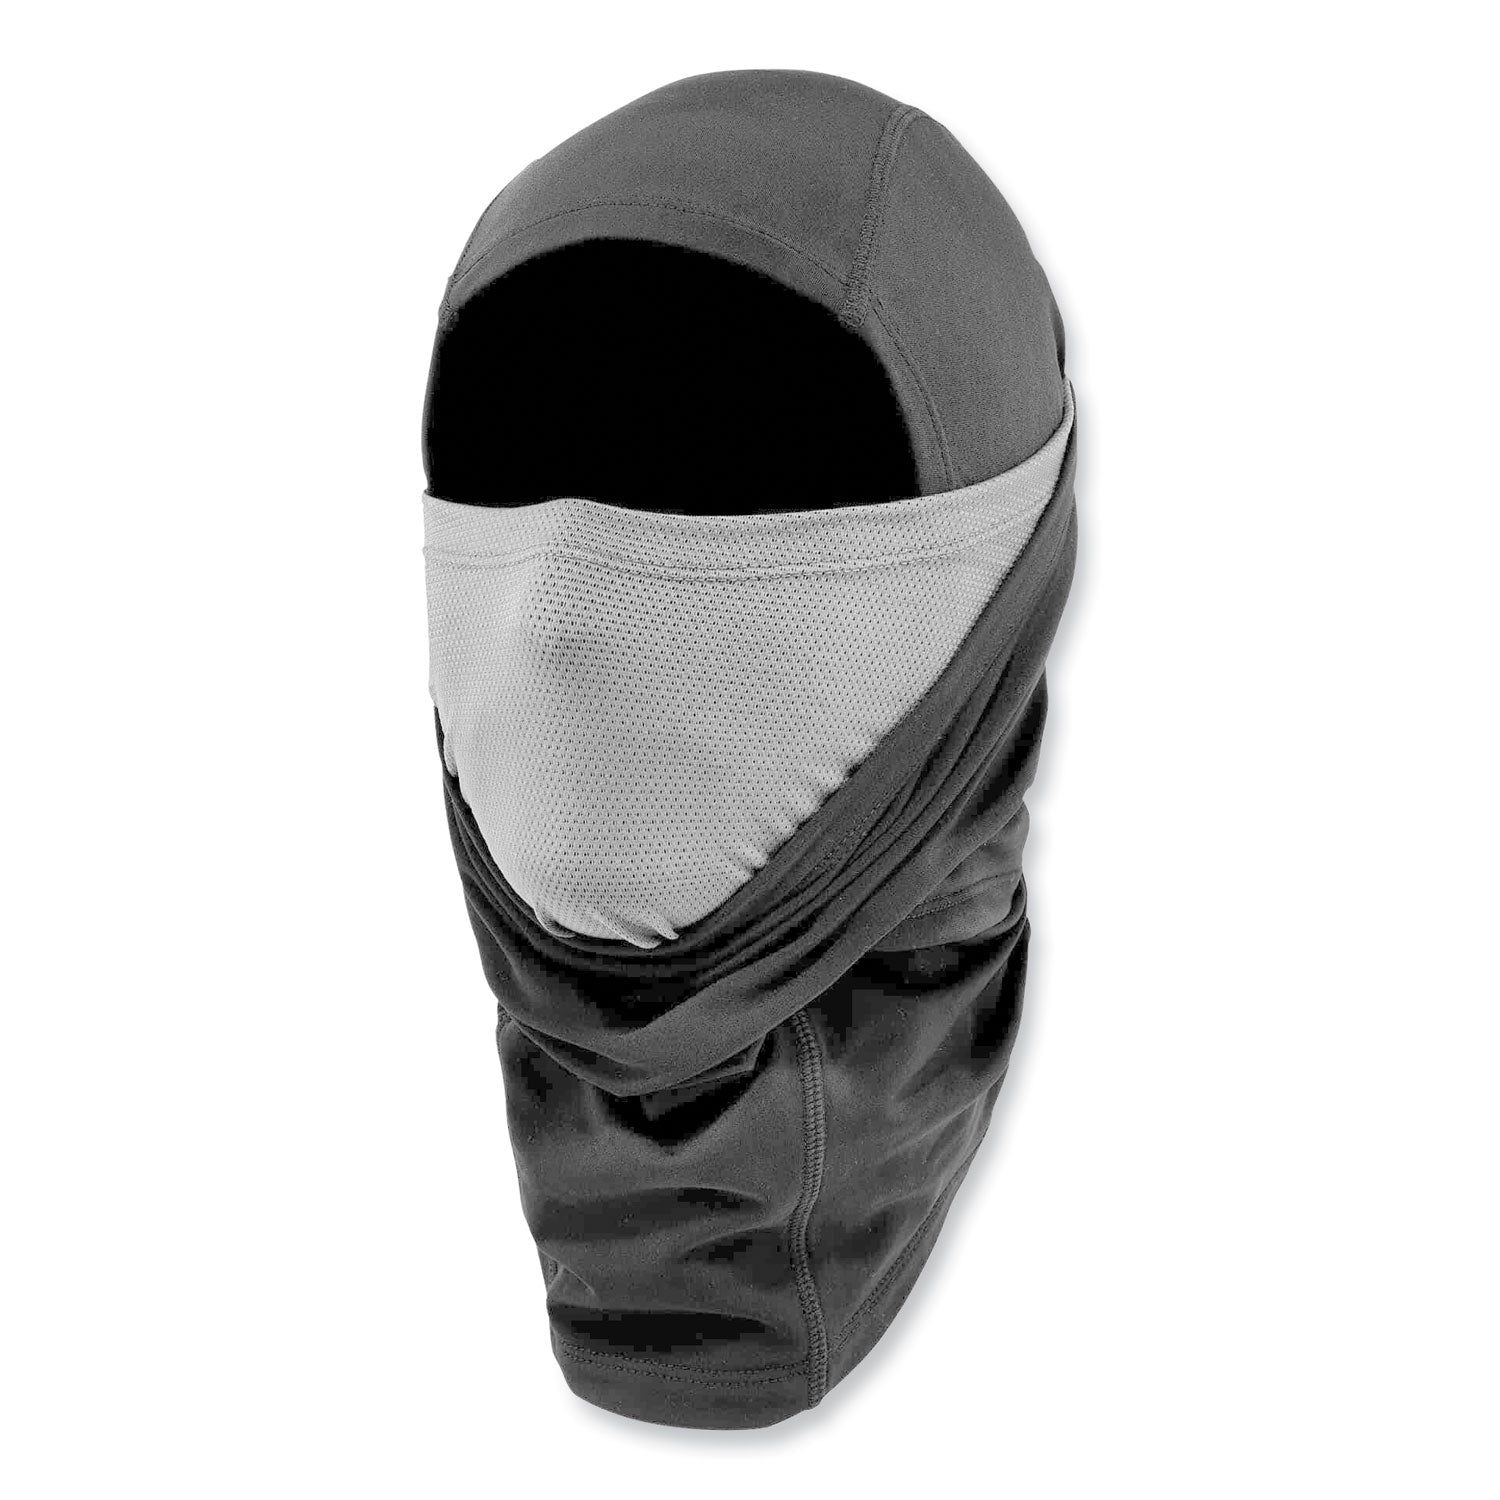 n-ferno-6844-dual-layer-balaclava-face-mask-nylon;-spandex-one-size-fits-most-black-ships-in-1-3-business-days_ego16844 - 2